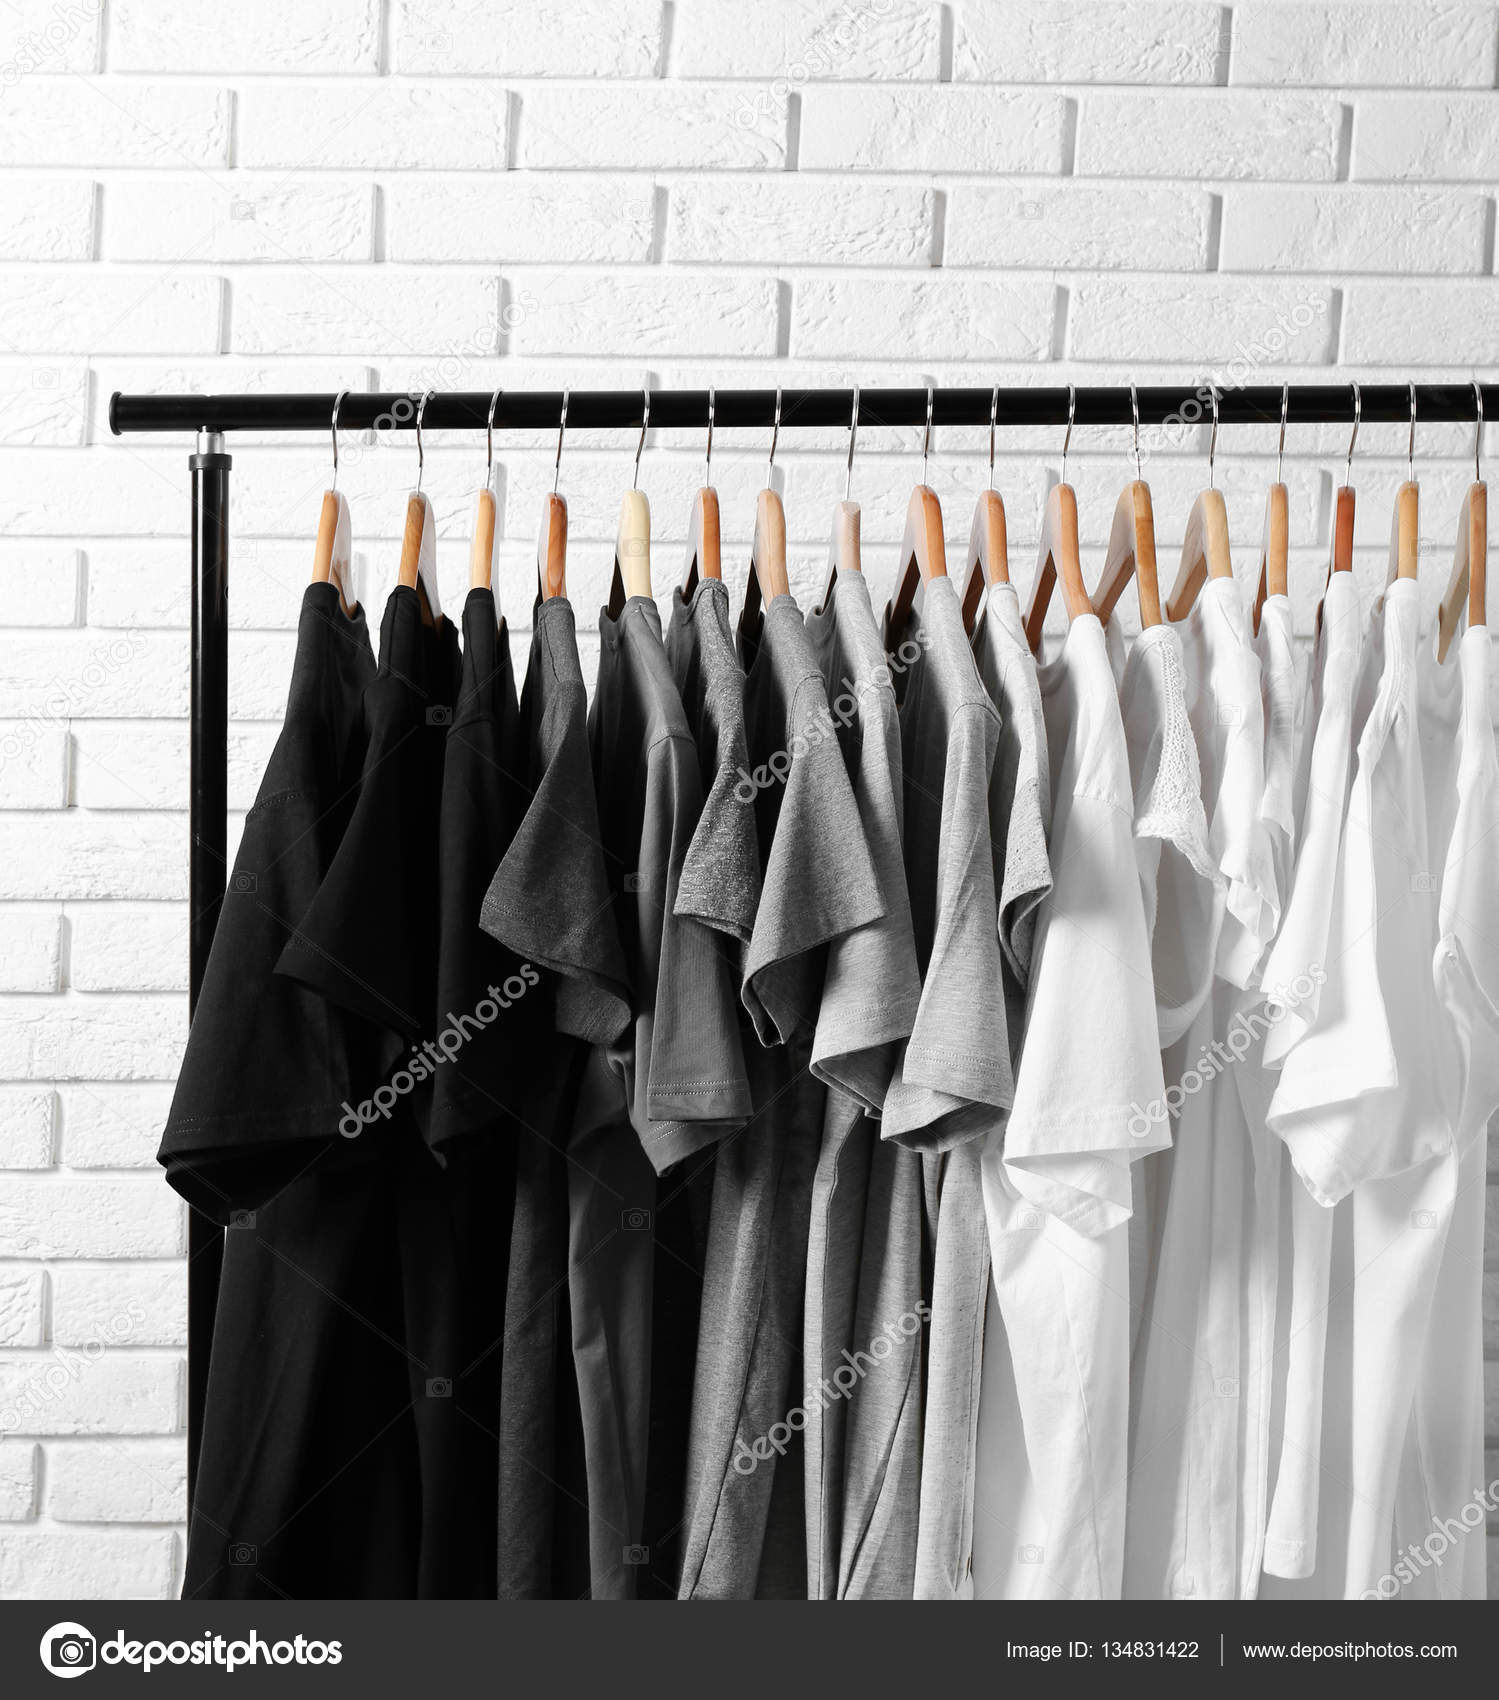 T-shirts on hangers against brick wall Stock Photo by ©belchonock 134831422